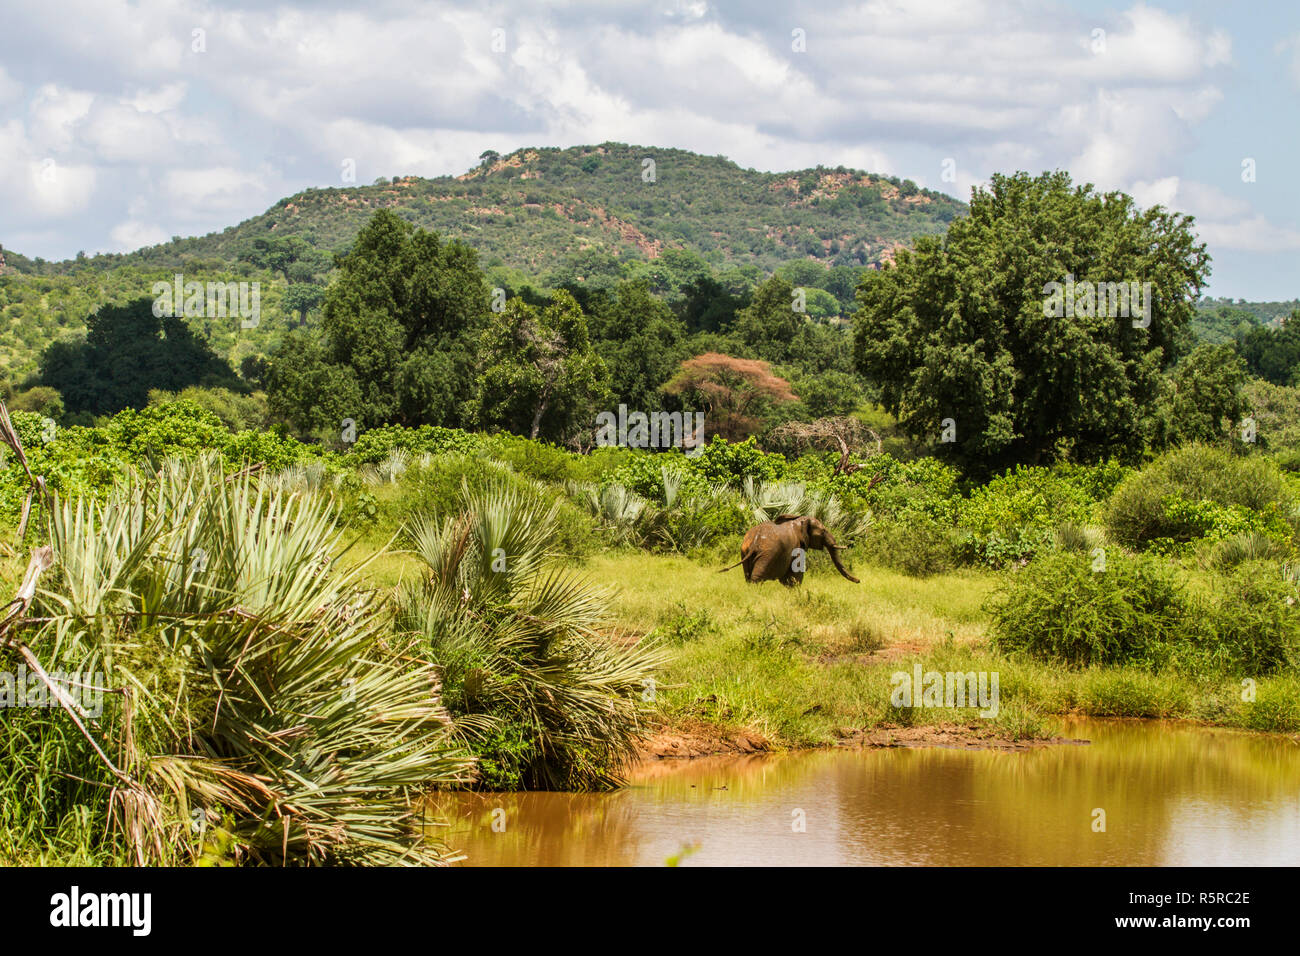 loxodonta africana, african bush elephant in its natural habitat in Kruger Park, South Africa Stock Photo